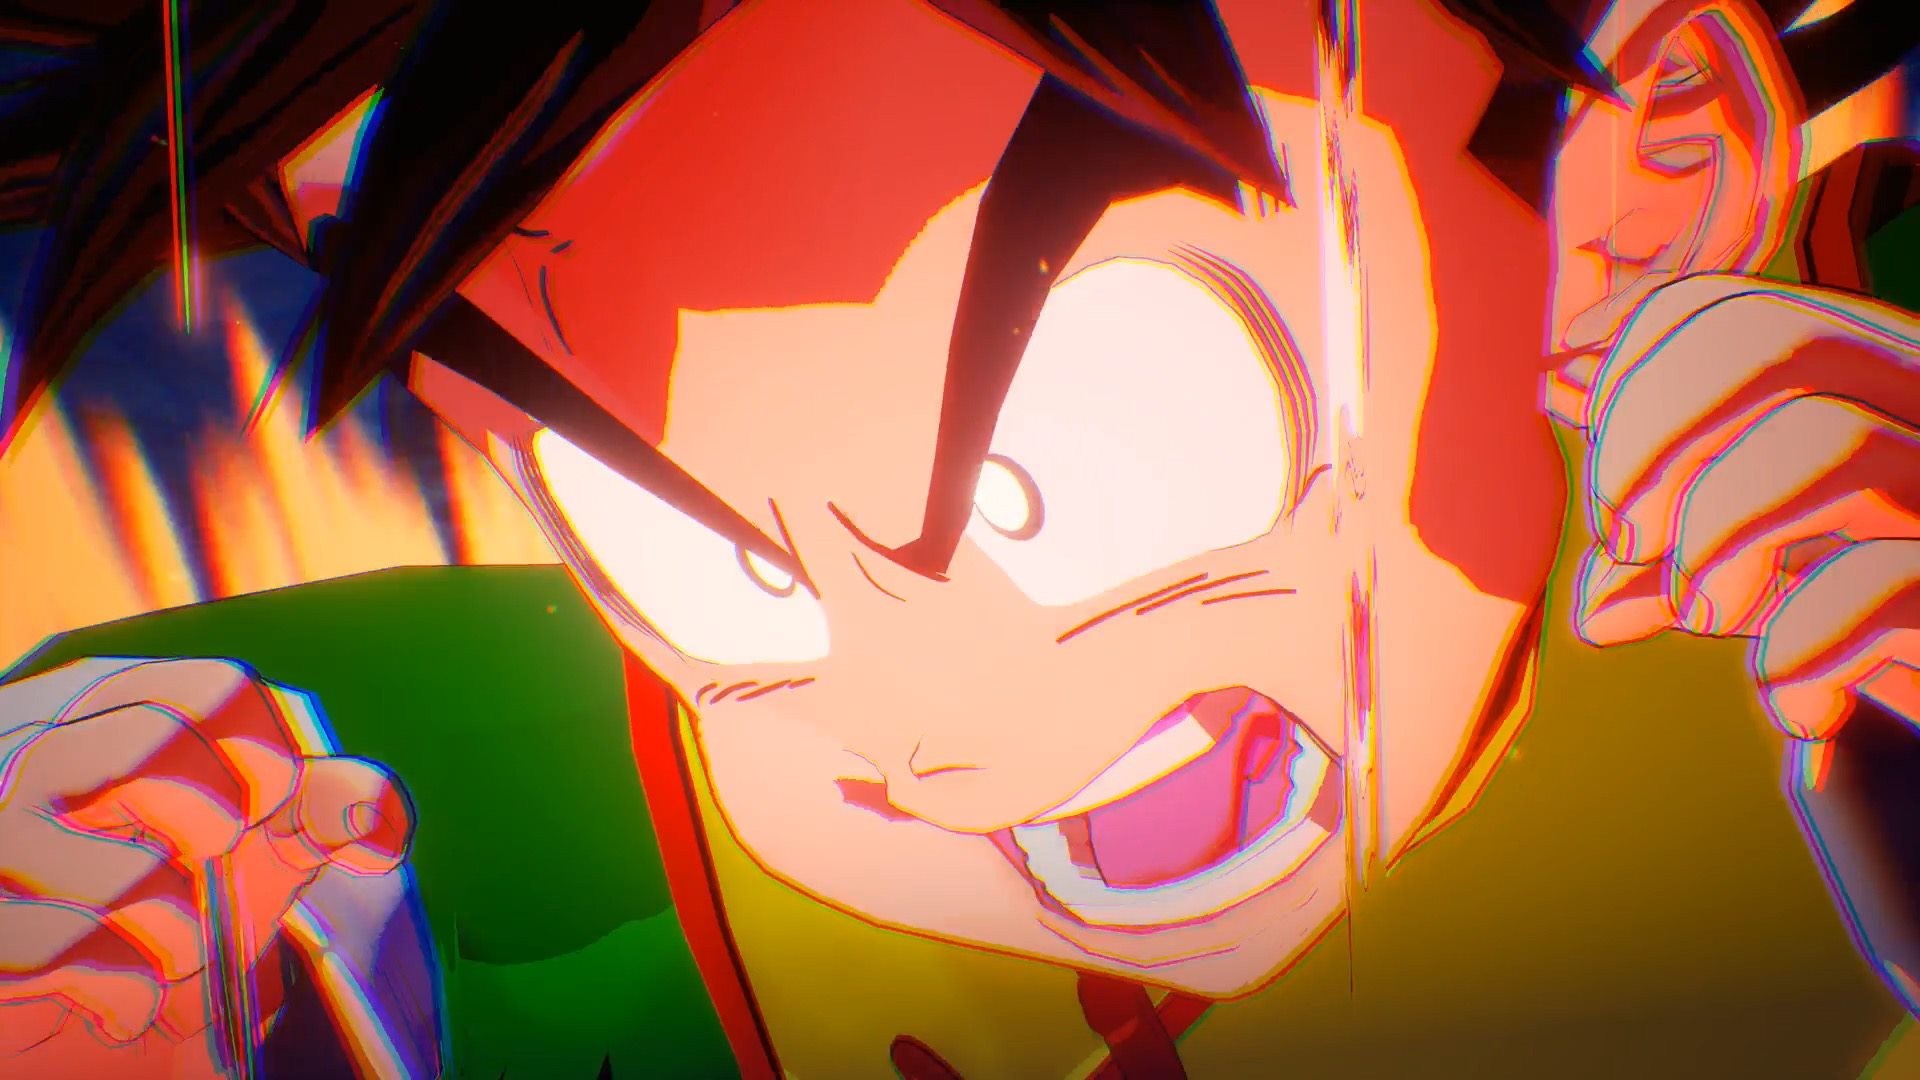 Dragon ball z: kakarot, dragon ball video game,, xone, xbox one, ps4, playstation 4, us, north america, eu, europe, release date, gameplay, features, price, pre-order, bandai namco, cyberconnect2